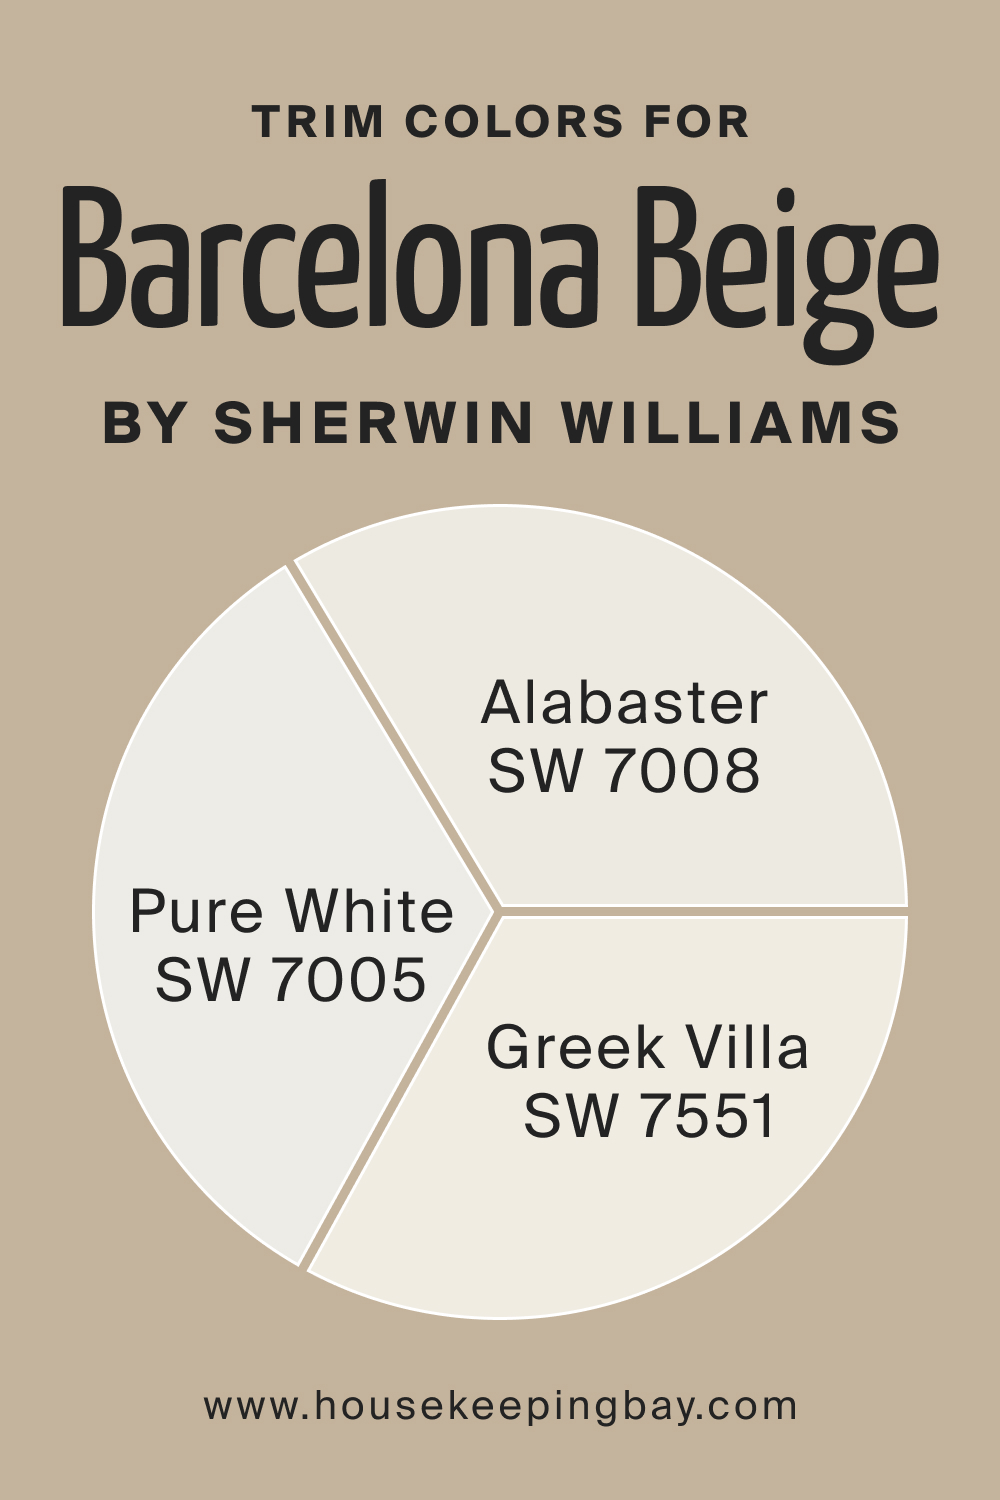 Trim Colors of Barcelona Beige by Sherwin Williams